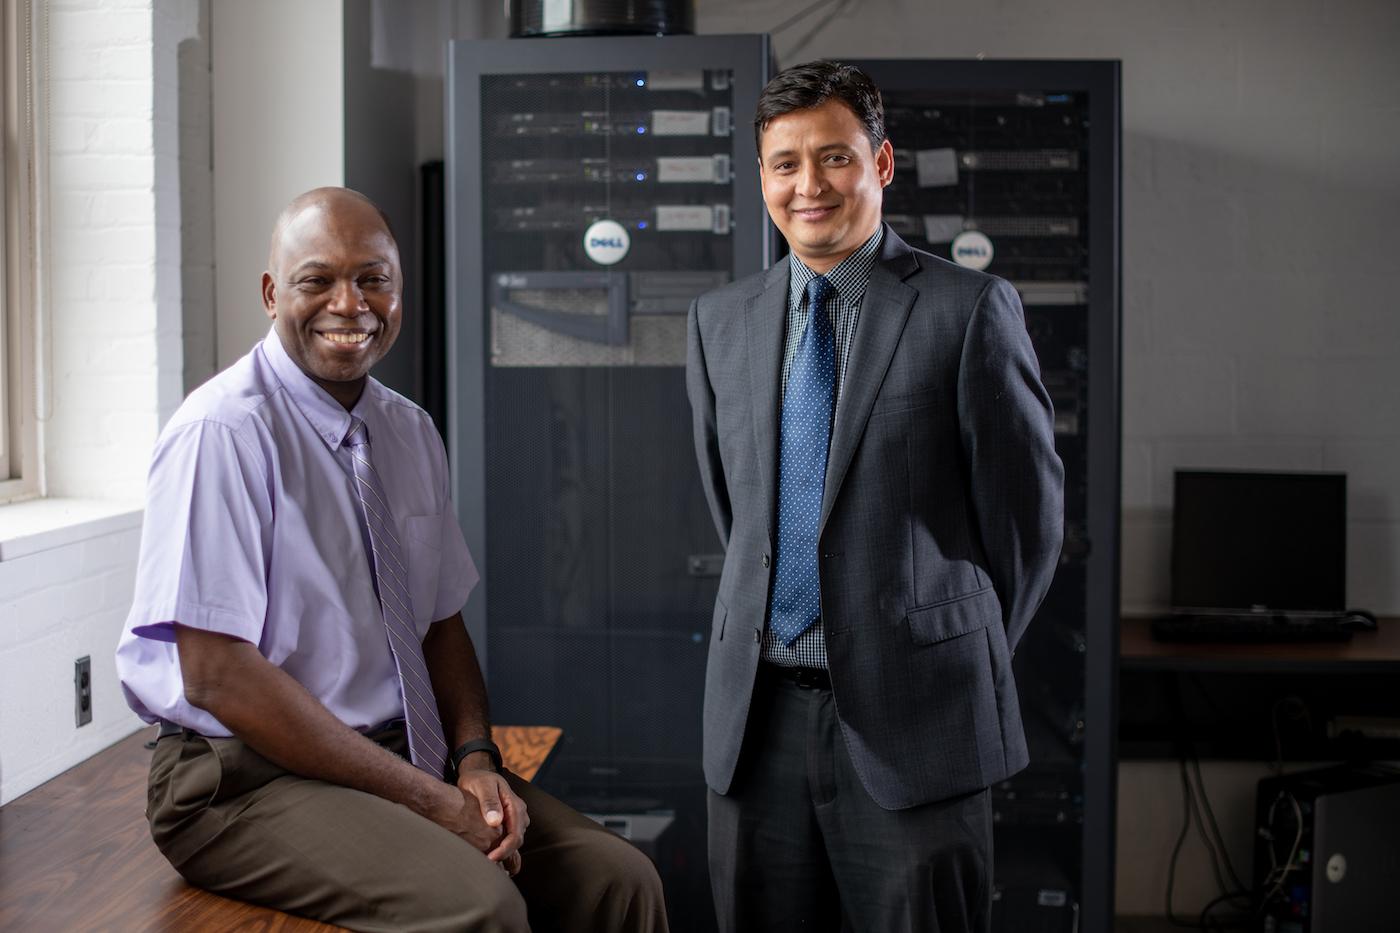 Two scientists in suits standing in front of computer server